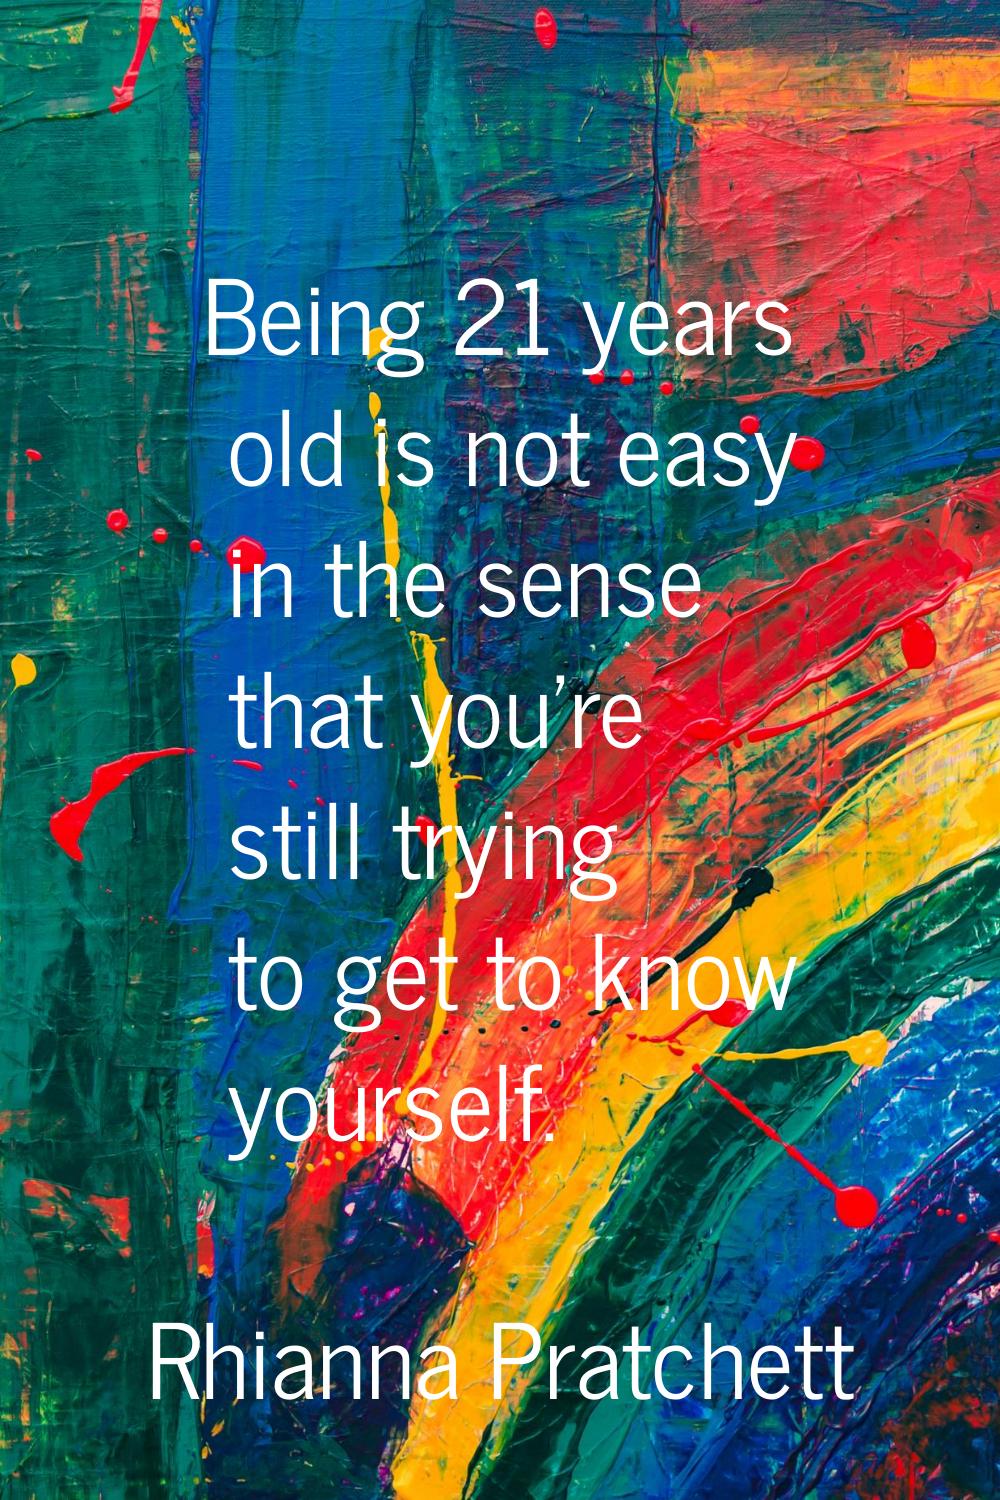 Being 21 years old is not easy in the sense that you're still trying to get to know yourself.